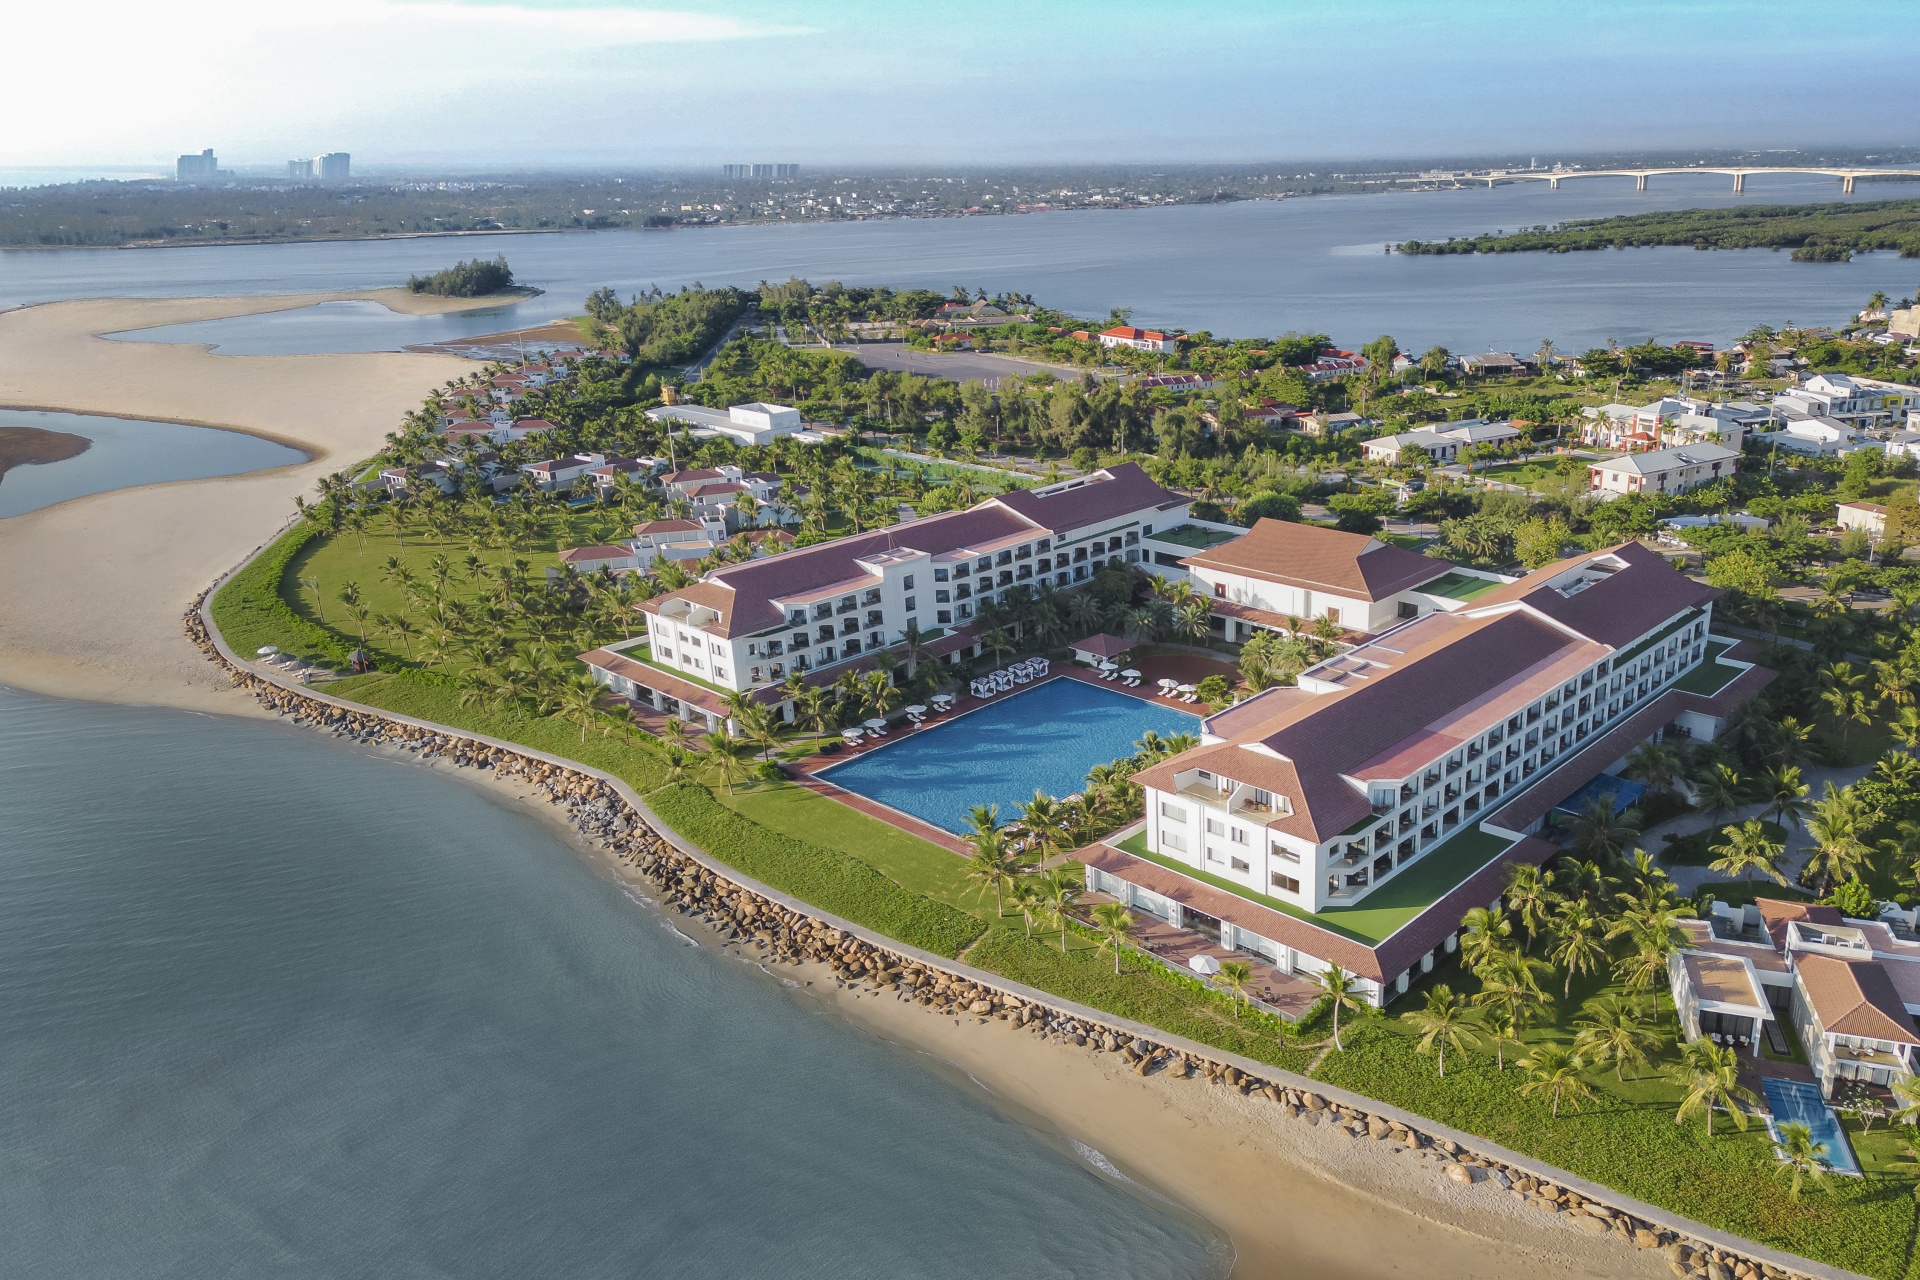 Marriott Bonvoy unveils trio of new beachside resorts in Nha Trang, Danang, and Hoi An